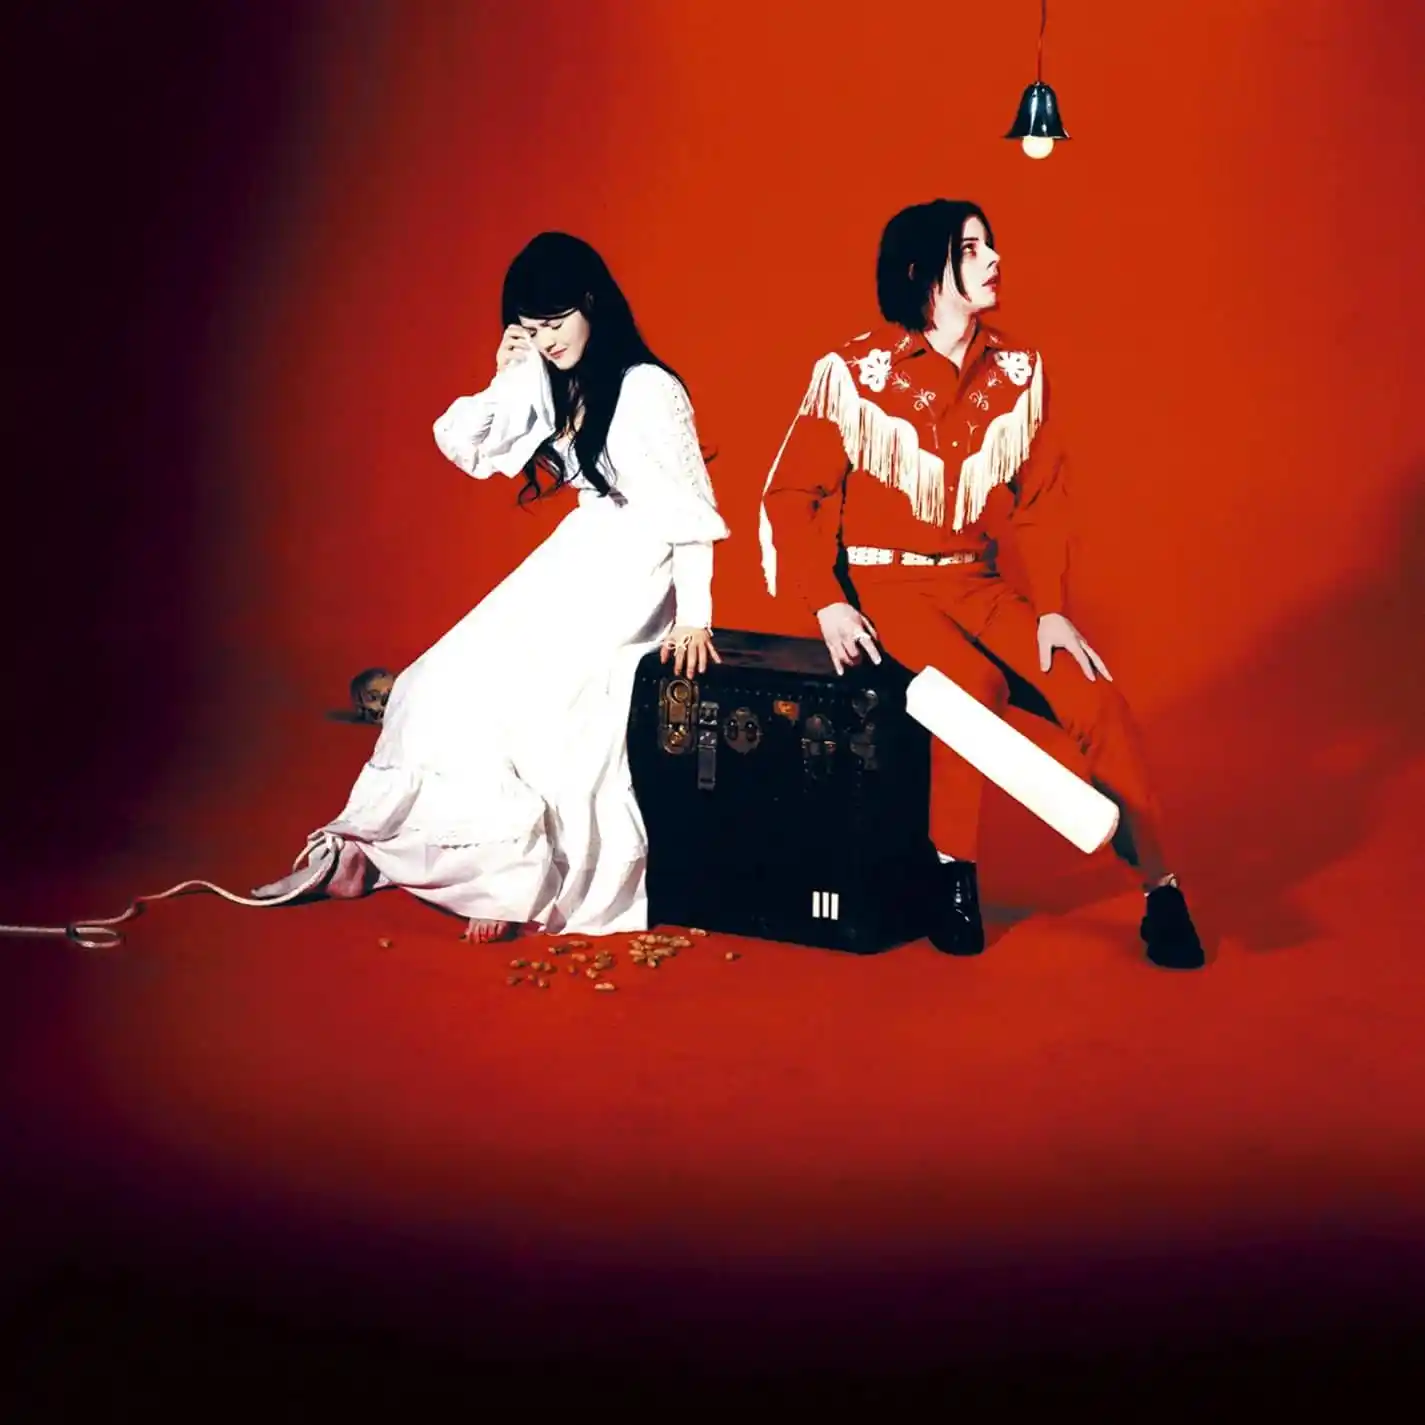 Behind the Song: The White Stripes, “Seven Nation Army”